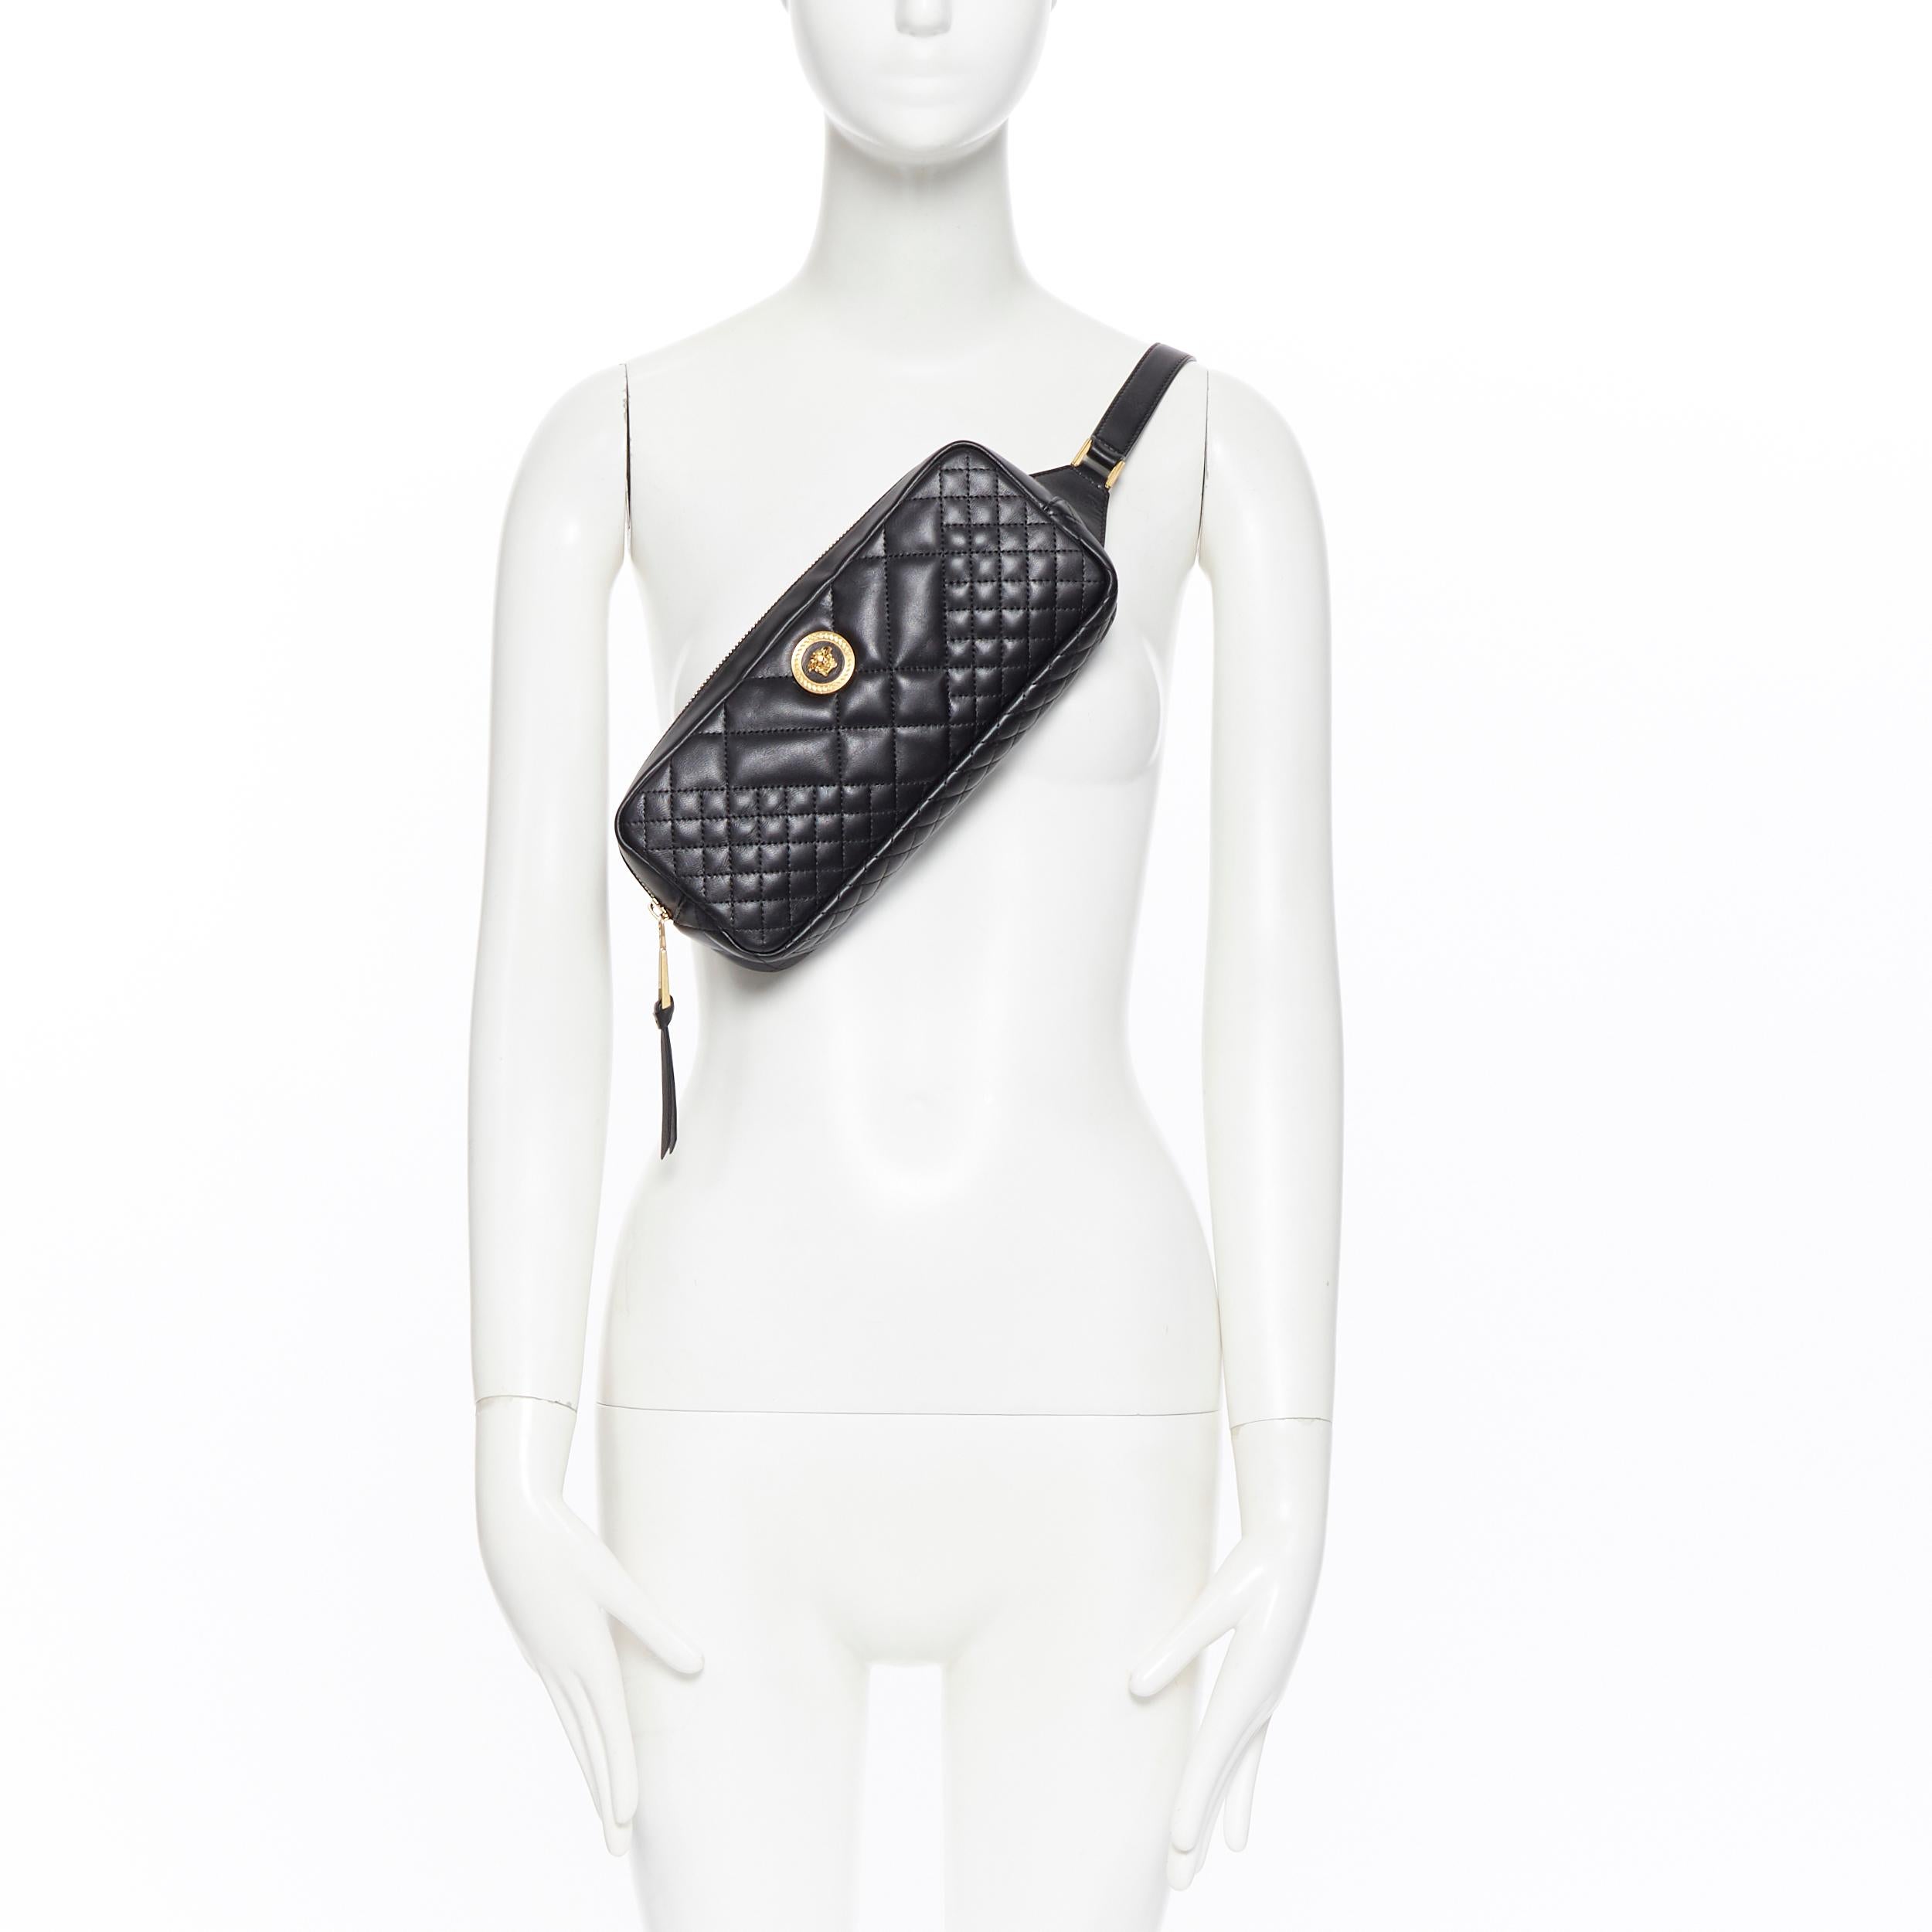 new VERSACE runway black quilted lamb leather gold Medusa long crossbody bag
Brand: Versace
Designer: Donatella Versace
Collection: 2019
Model Name / Style: Medusa crossbody bag
Material: Leather; lamb leather
Color: Black
Pattern: Solid
Closure: